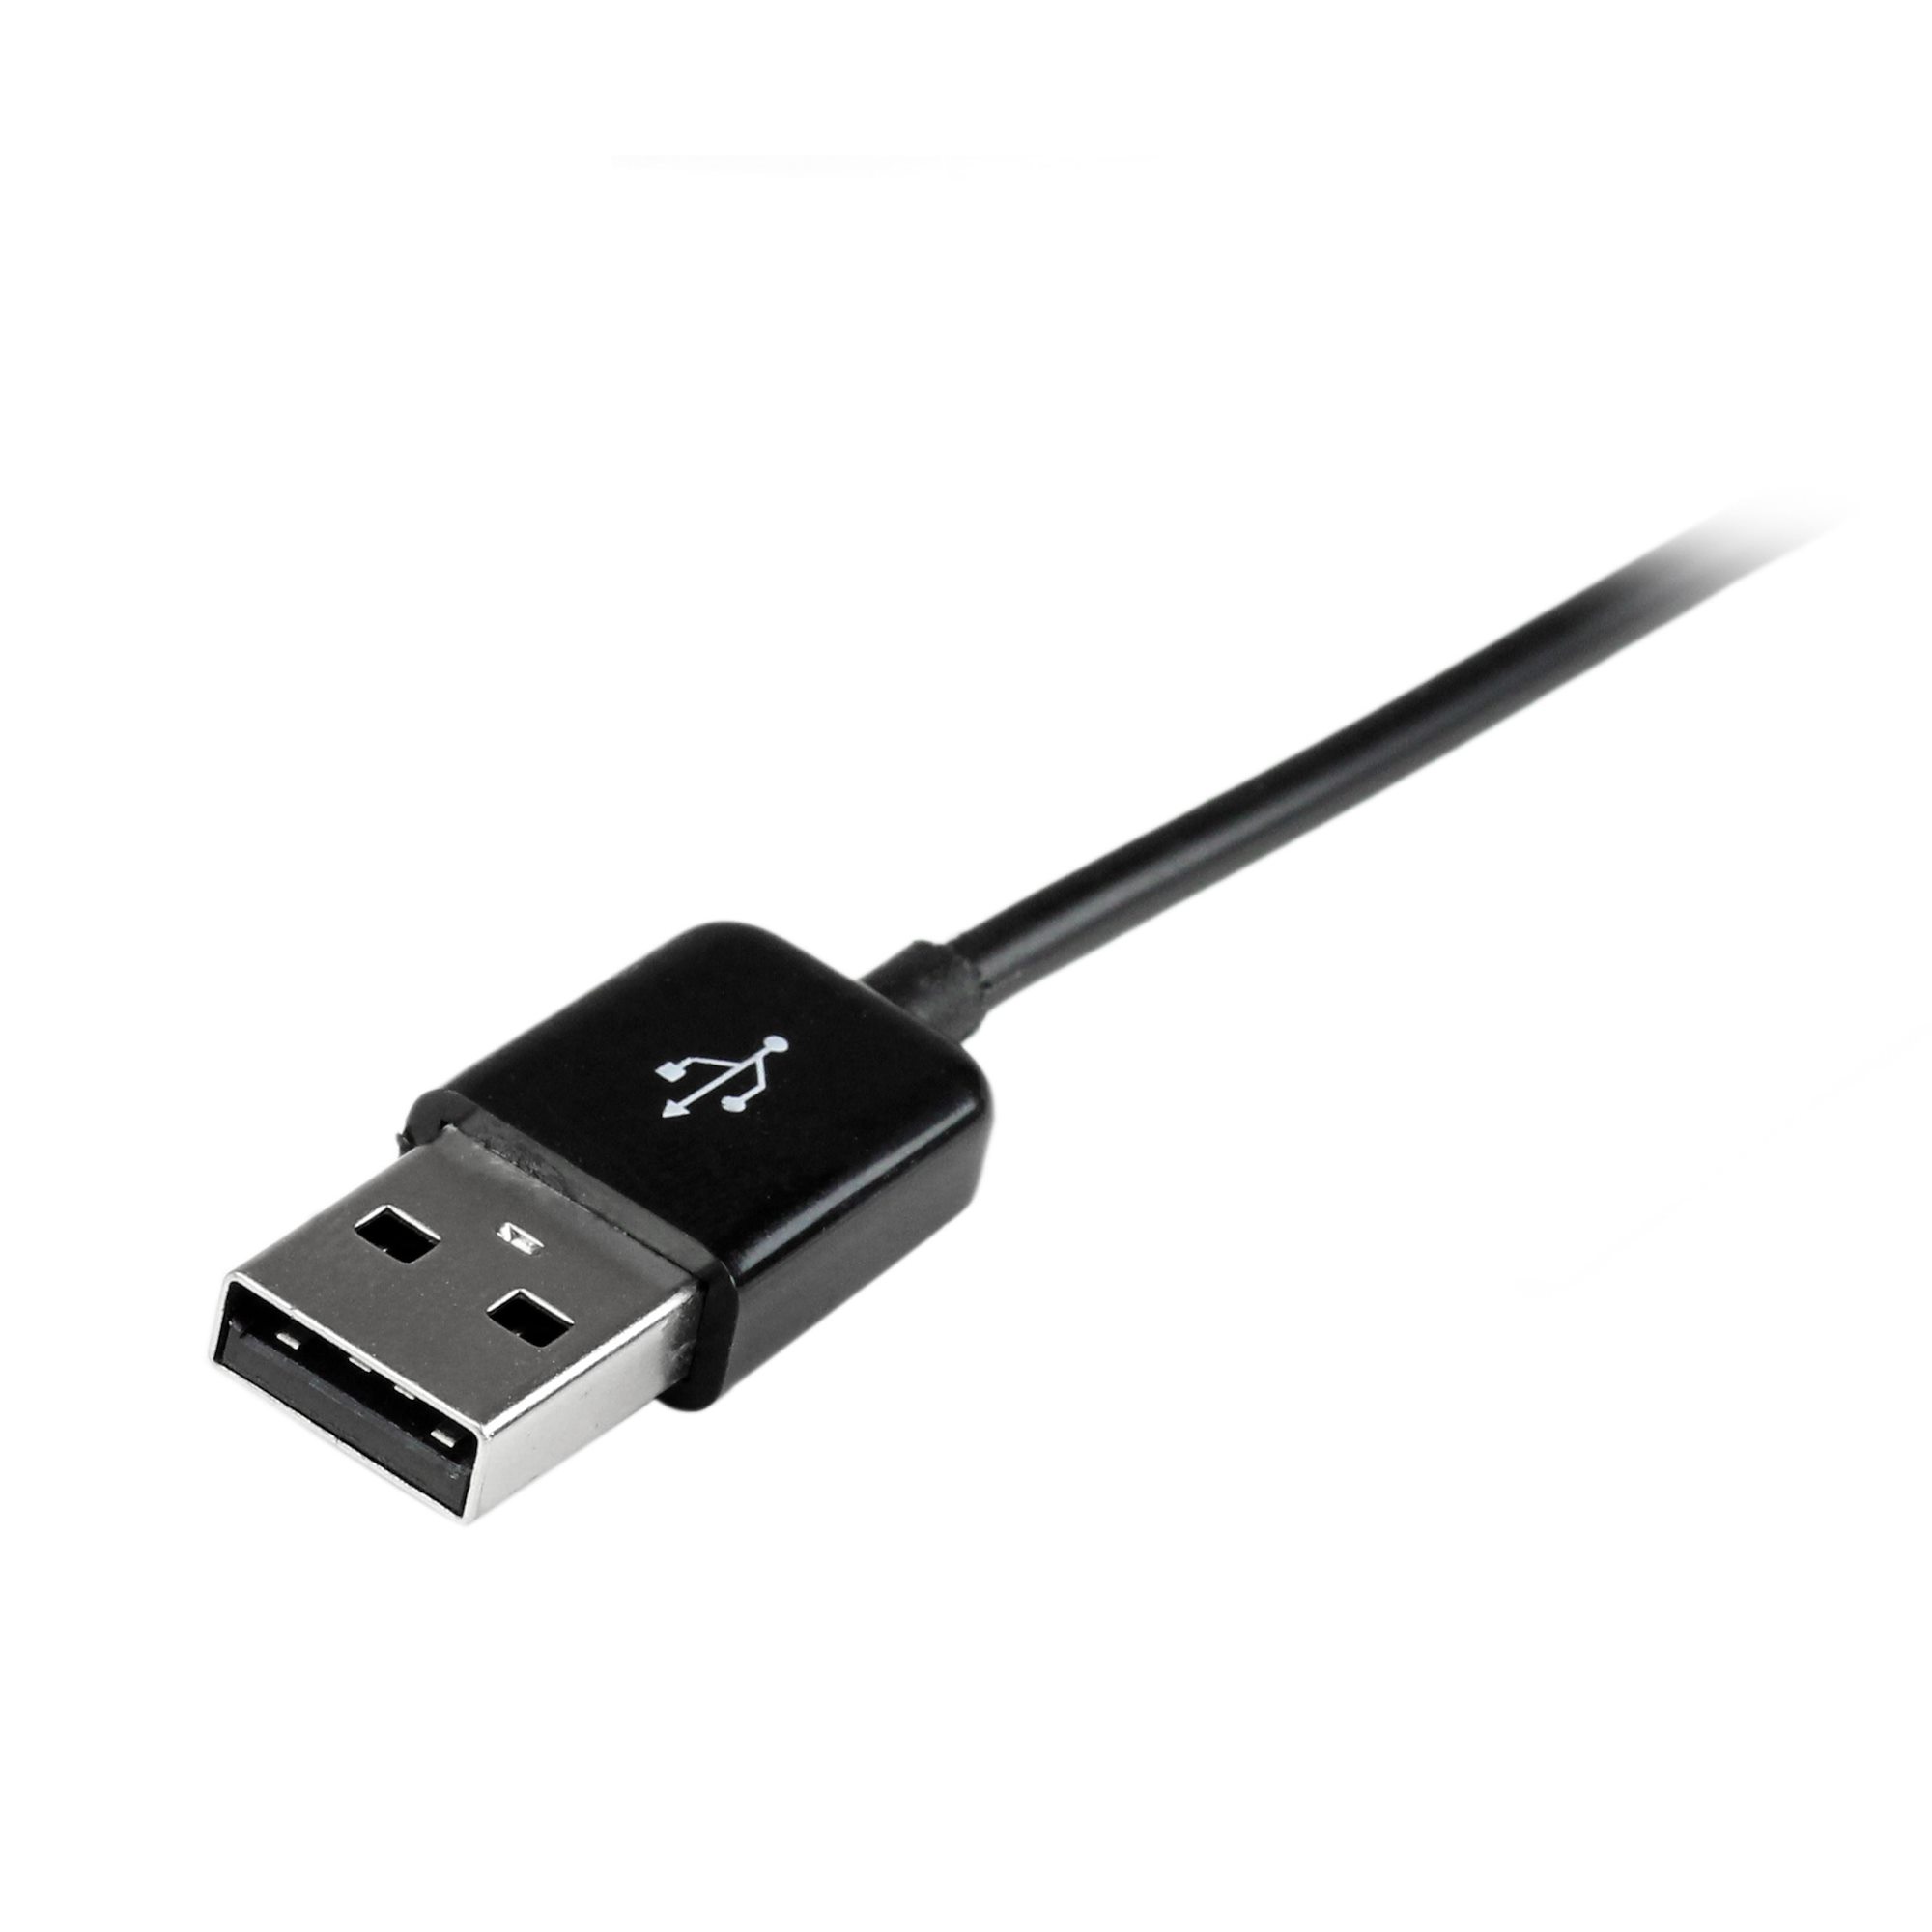 Dock Connector to USB Cable for - USB (USB 2.0) | StarTech.com